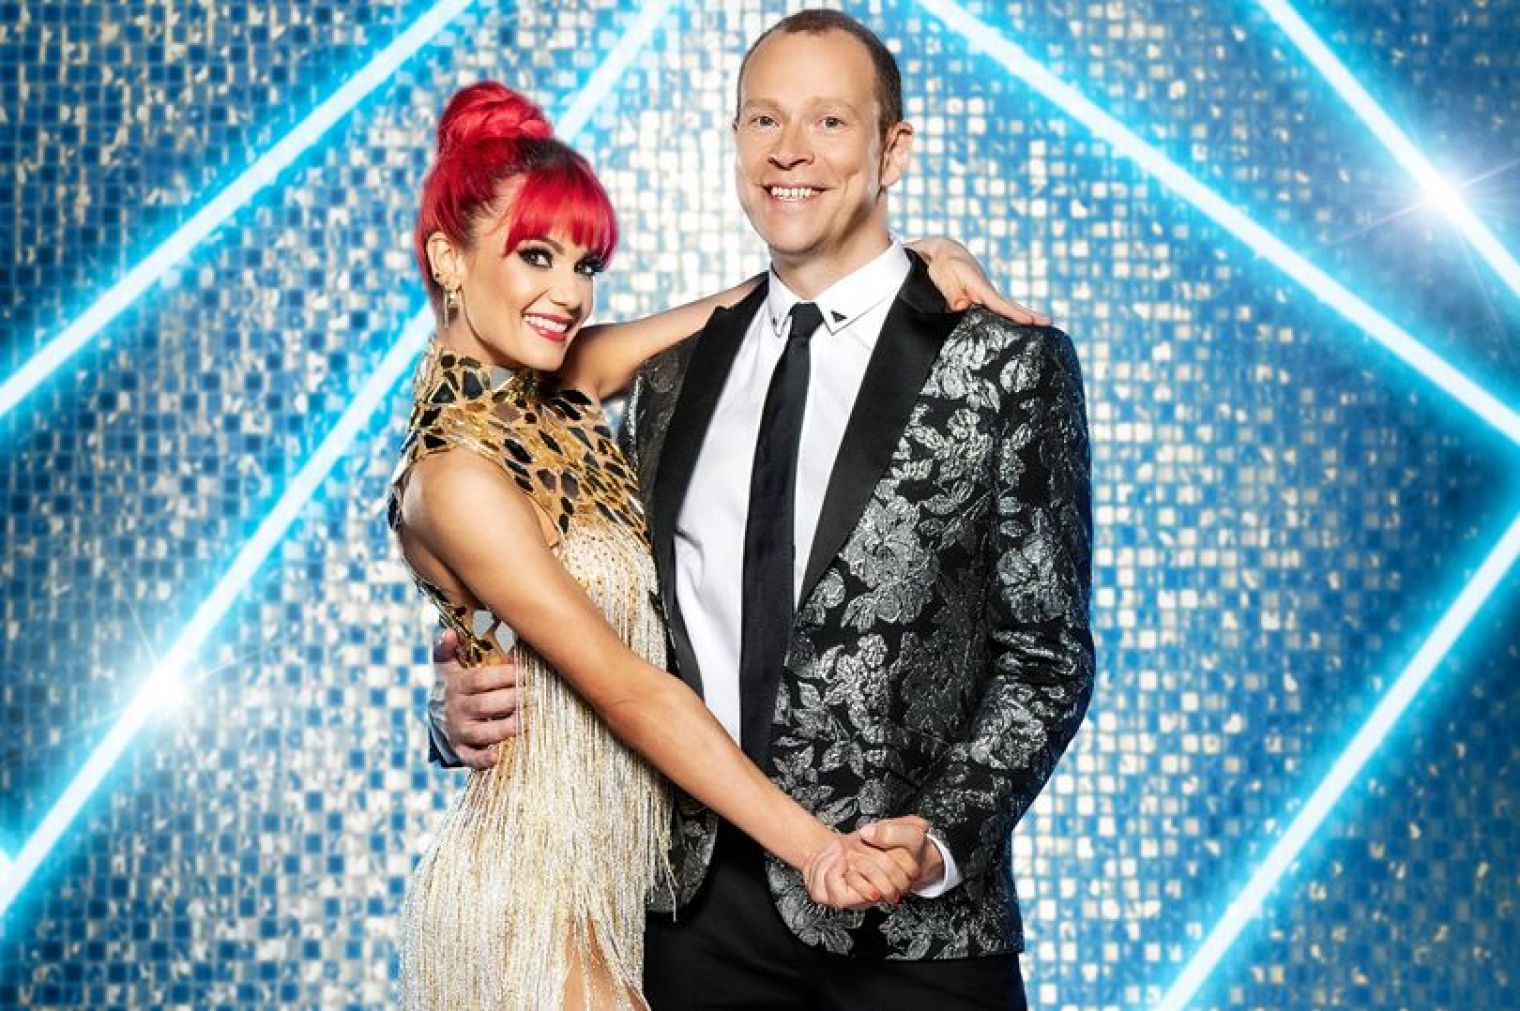 Robert Webb's Strictly journey begins as he is paired up with professional dancer Diane Buswell.